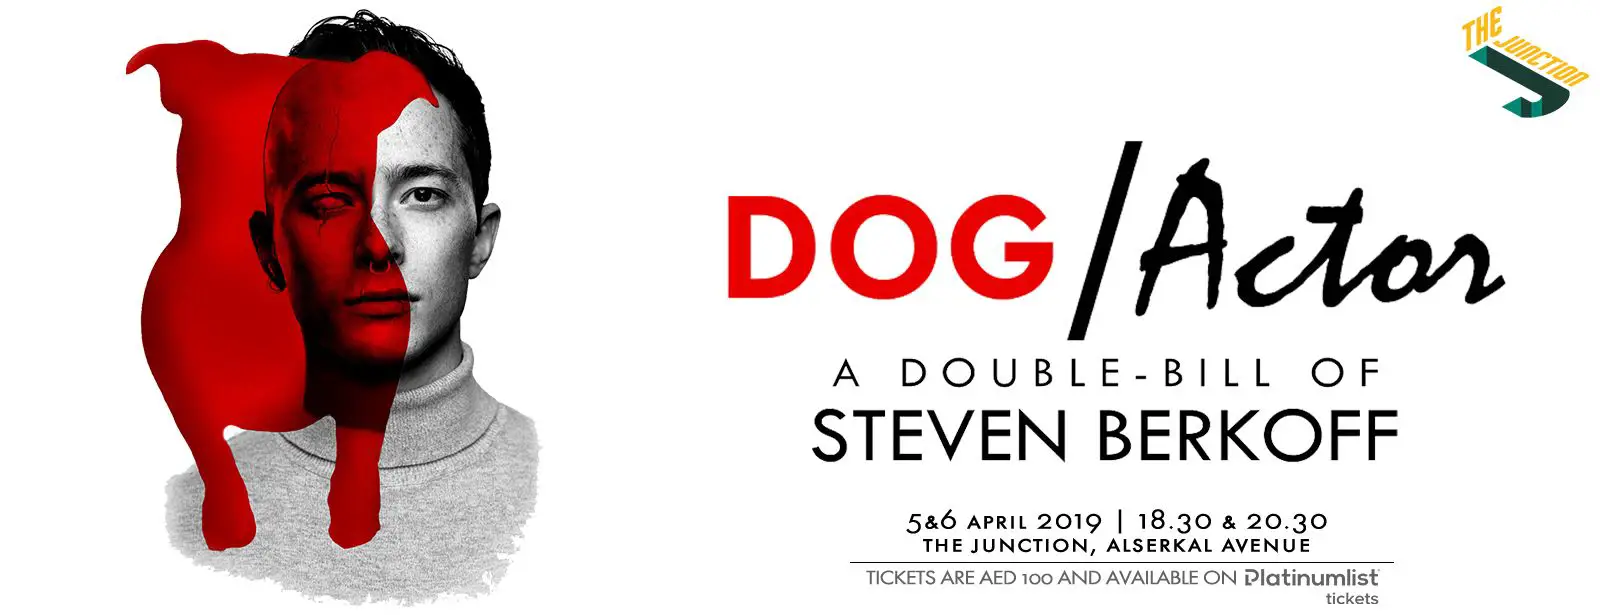 Dog/Actor by Steven Berkoff